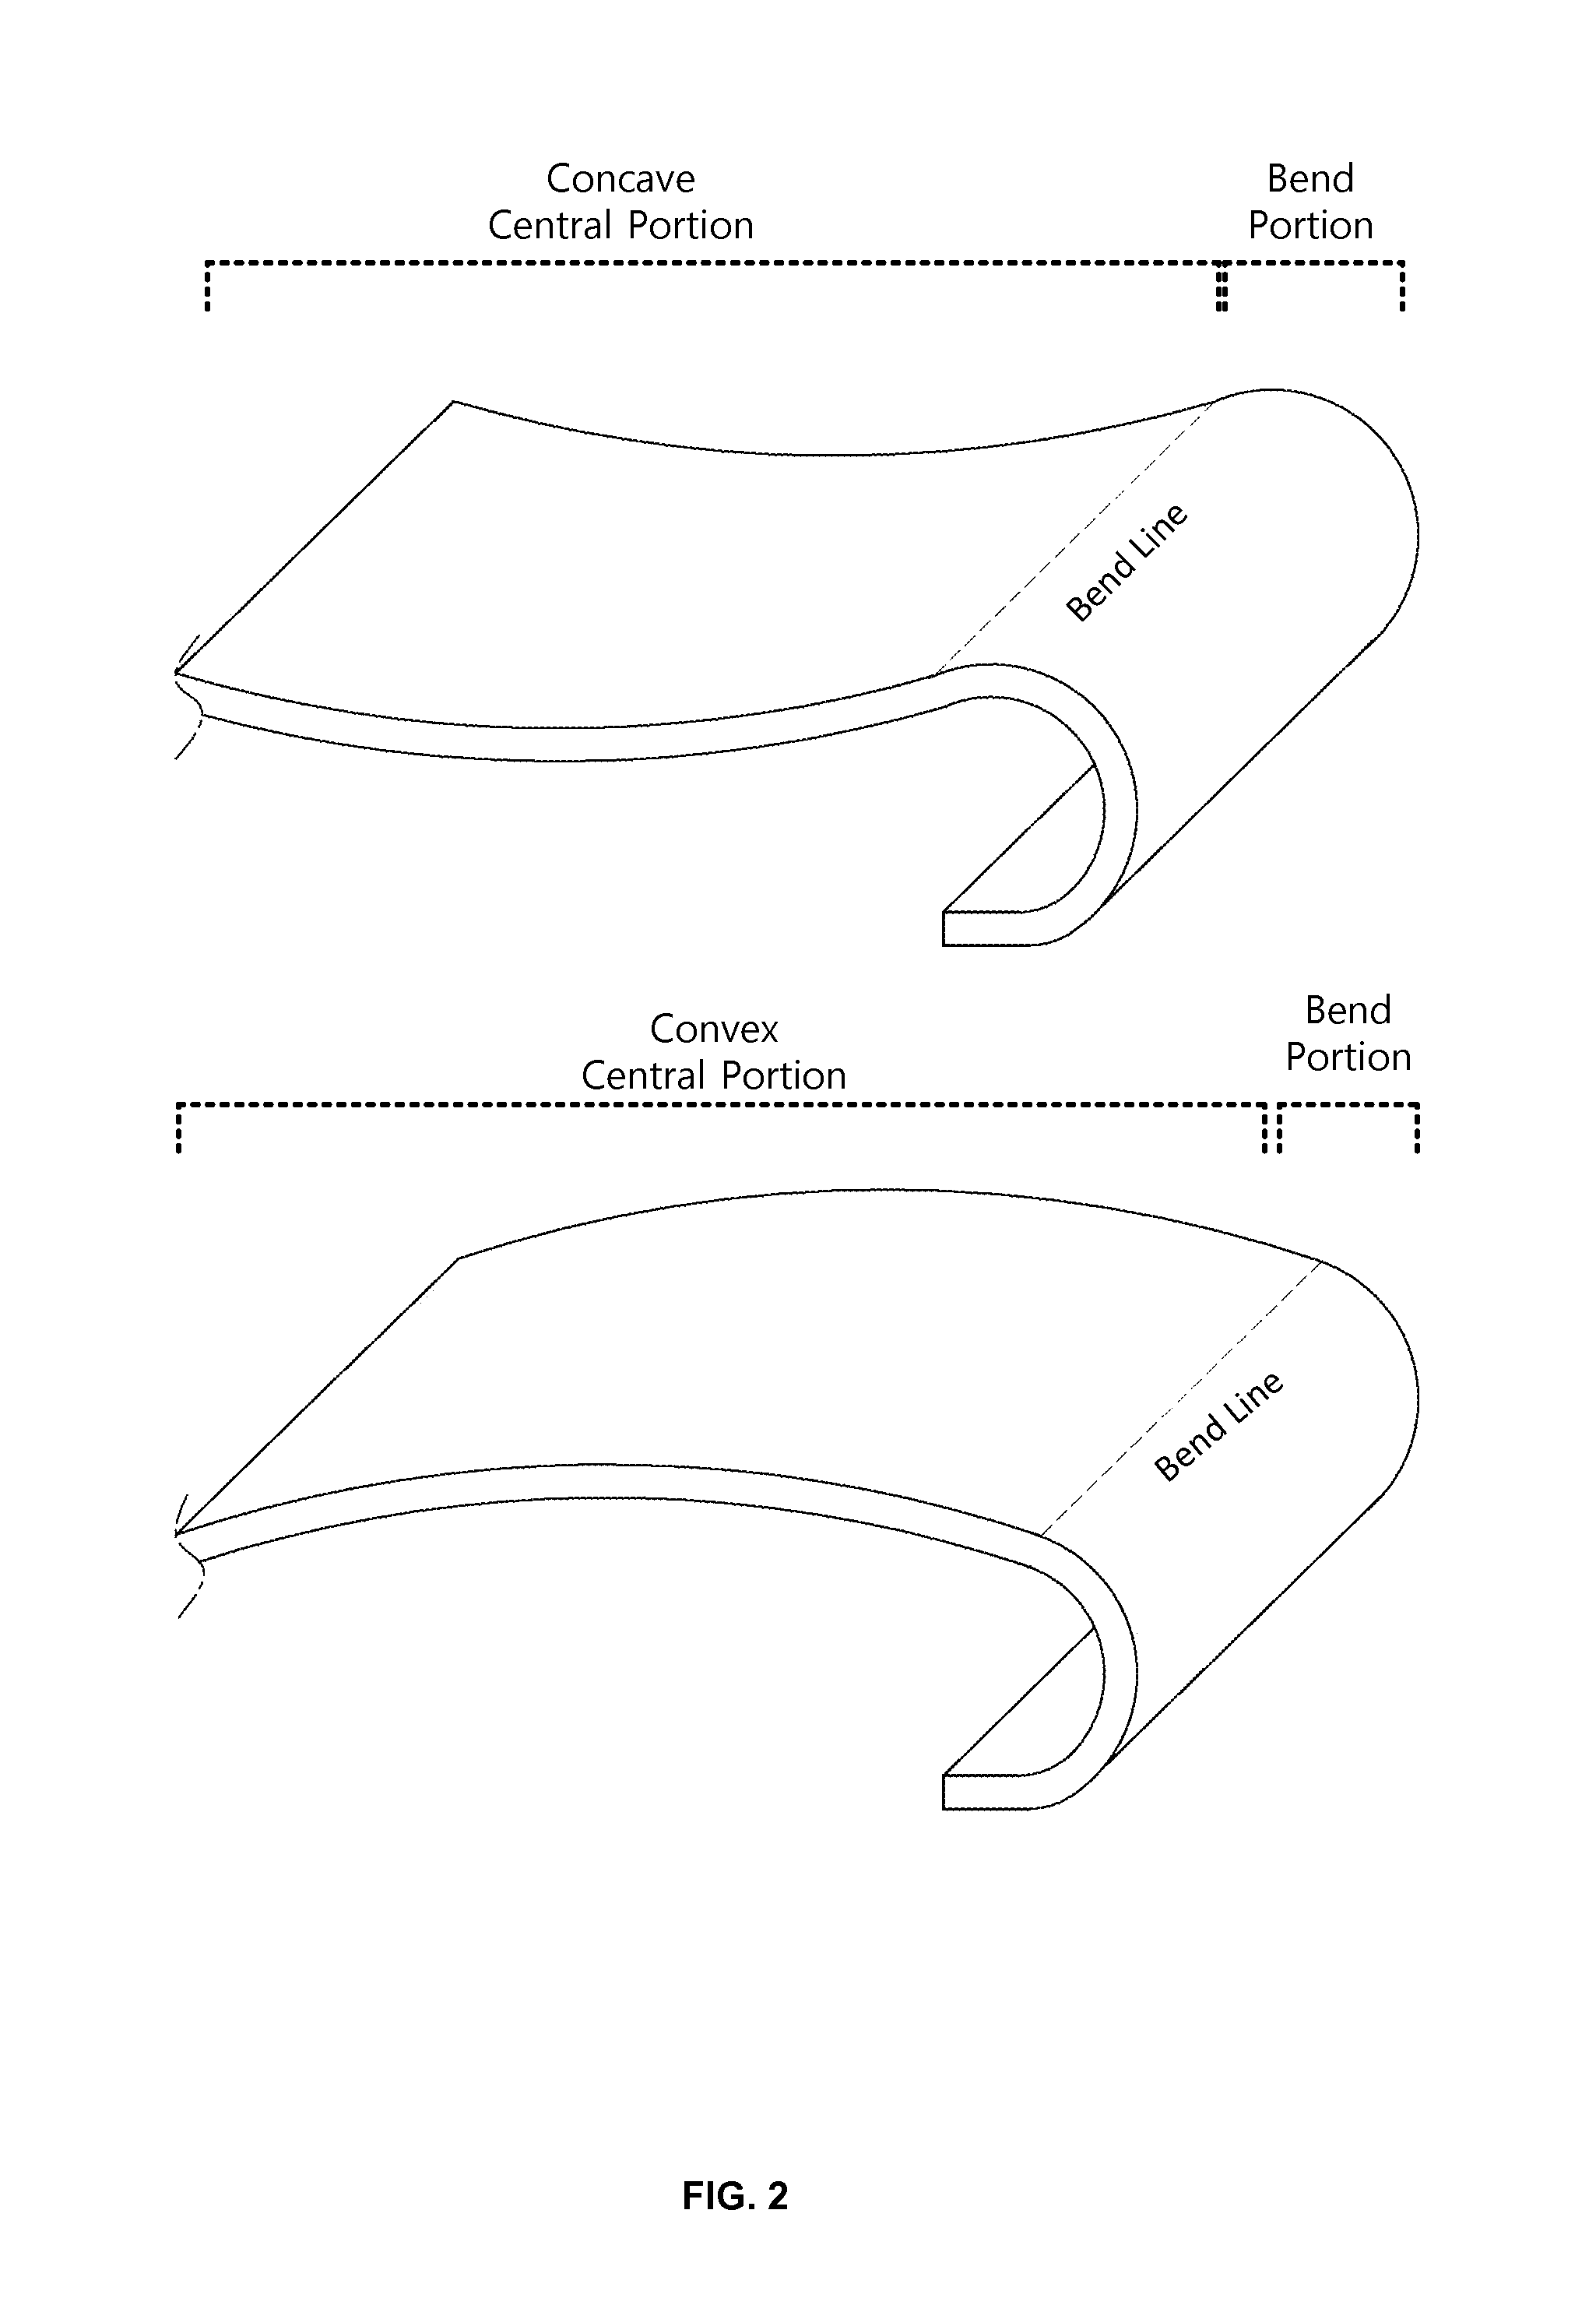 Flexible display device with bridged wire traces